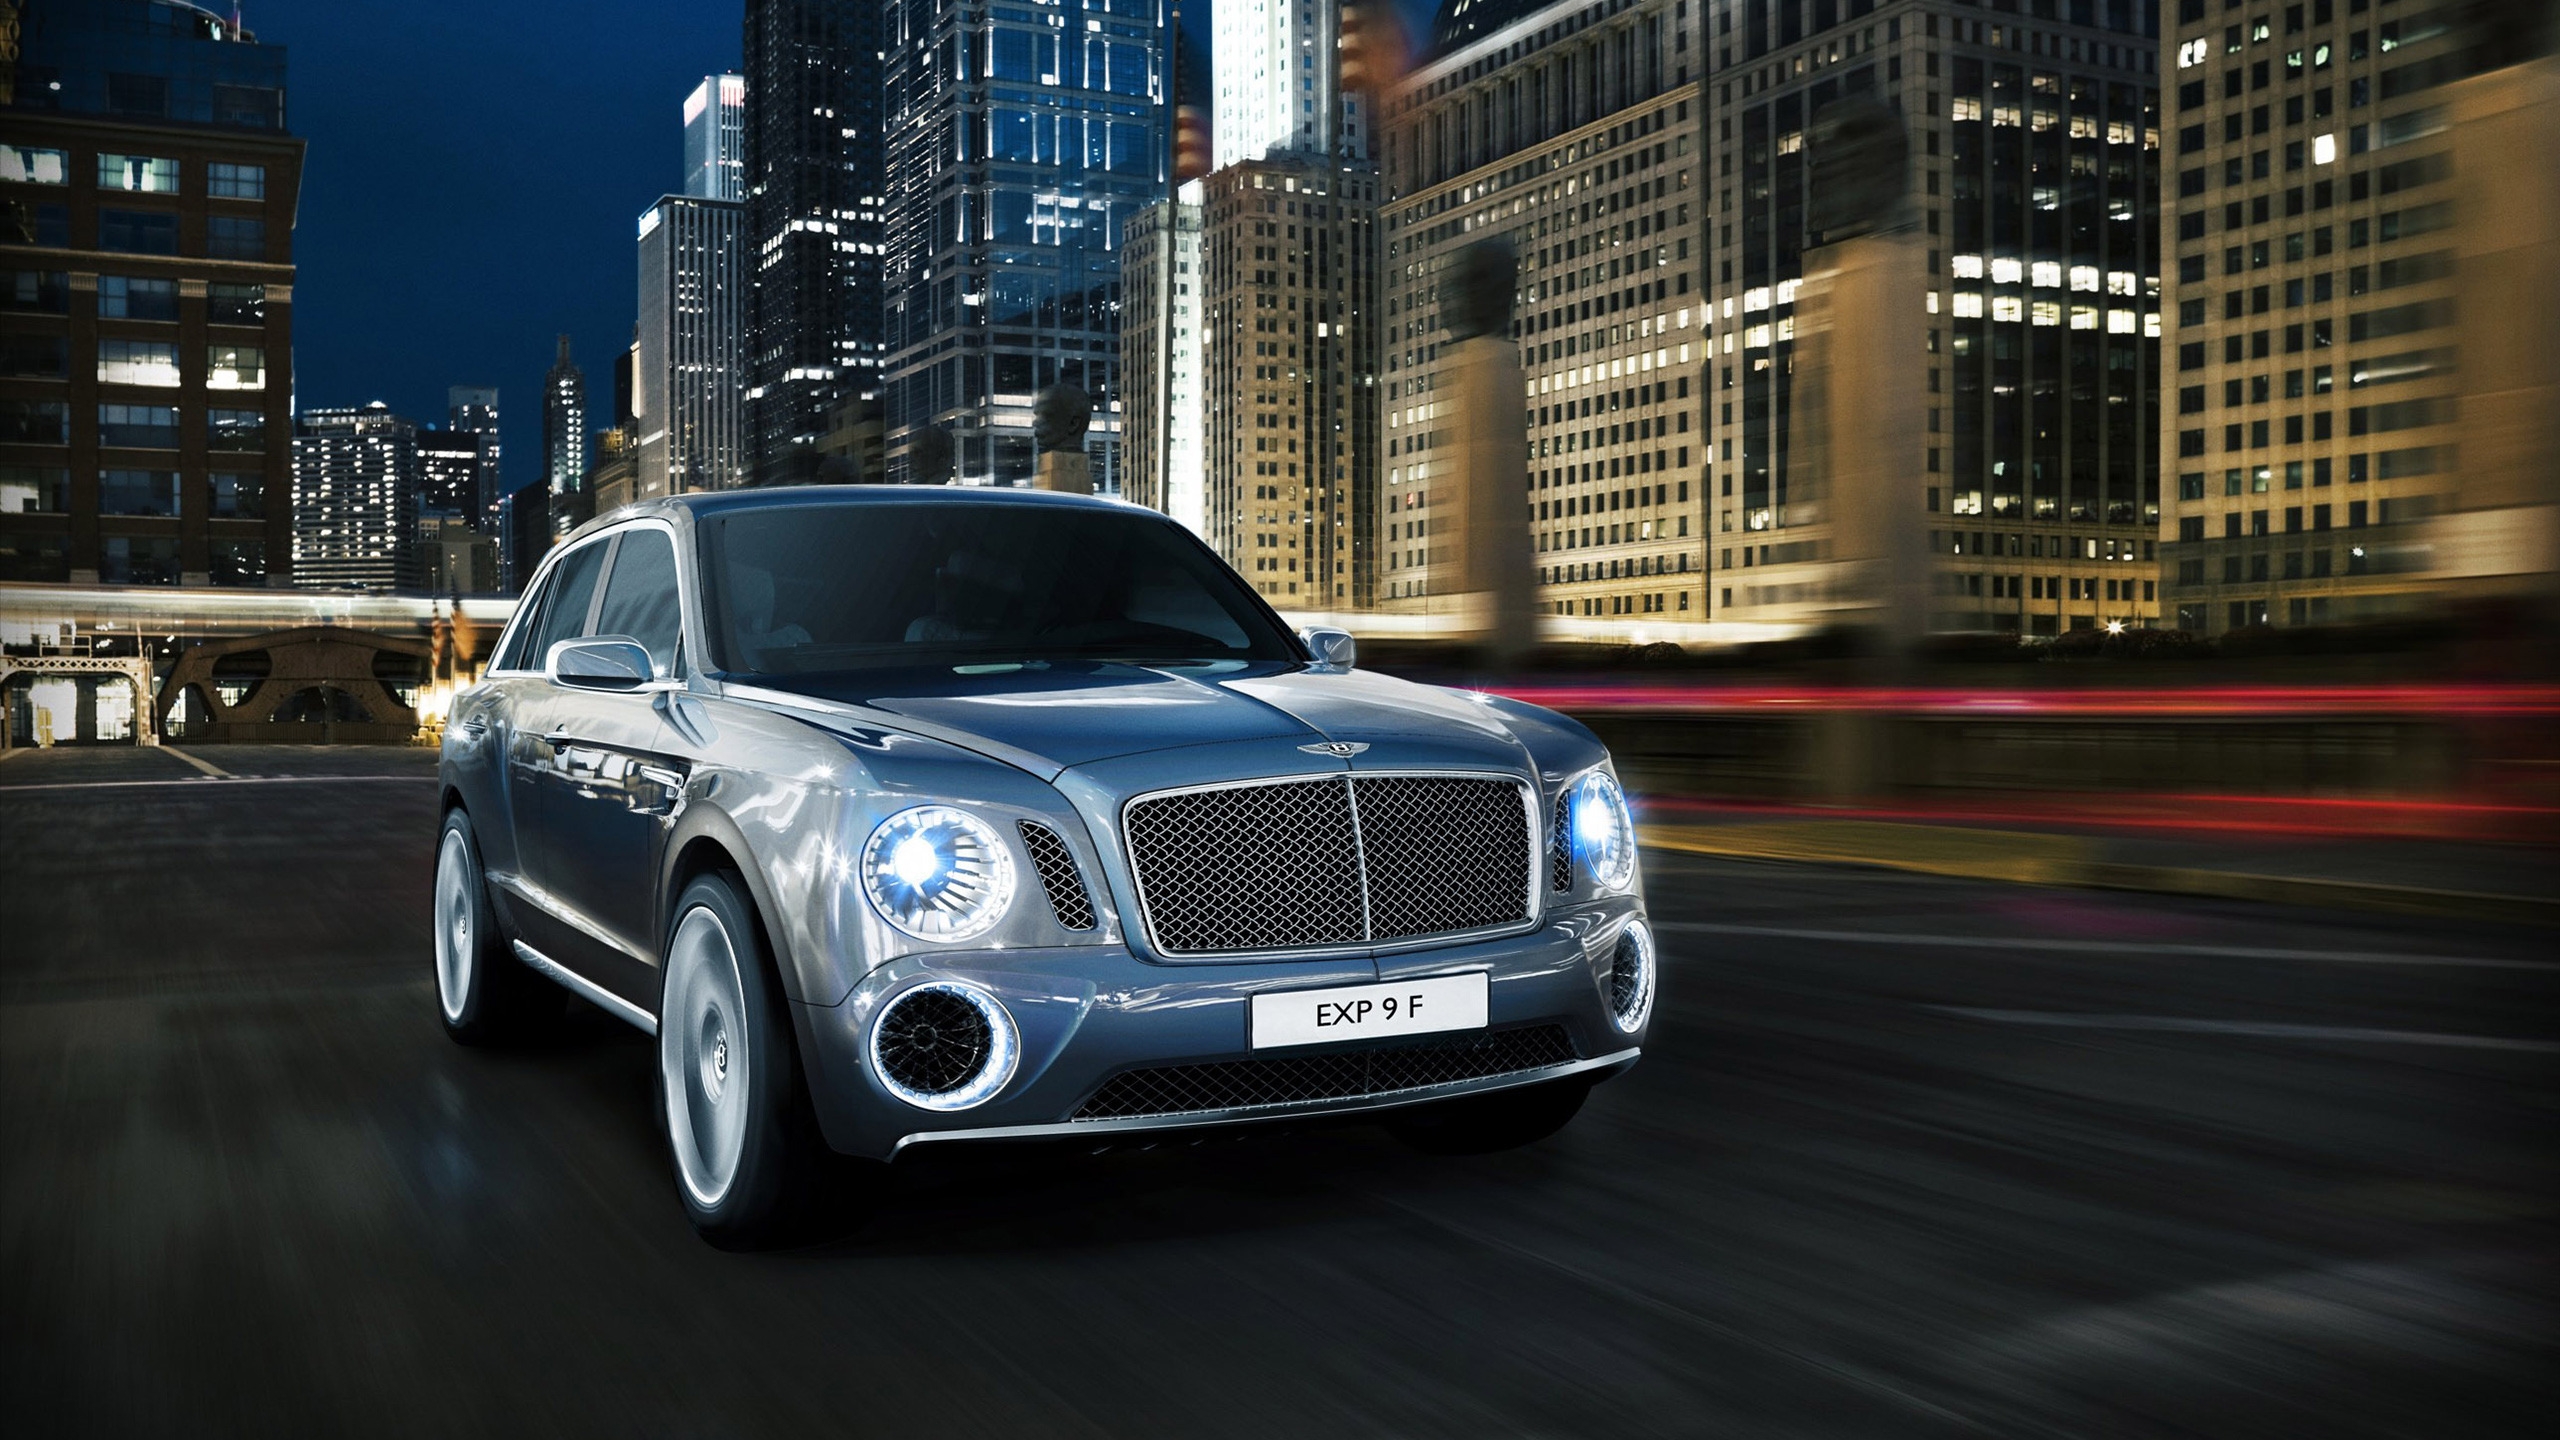 Concept Bentley EXP 9 F for 2560x1440 HDTV resolution